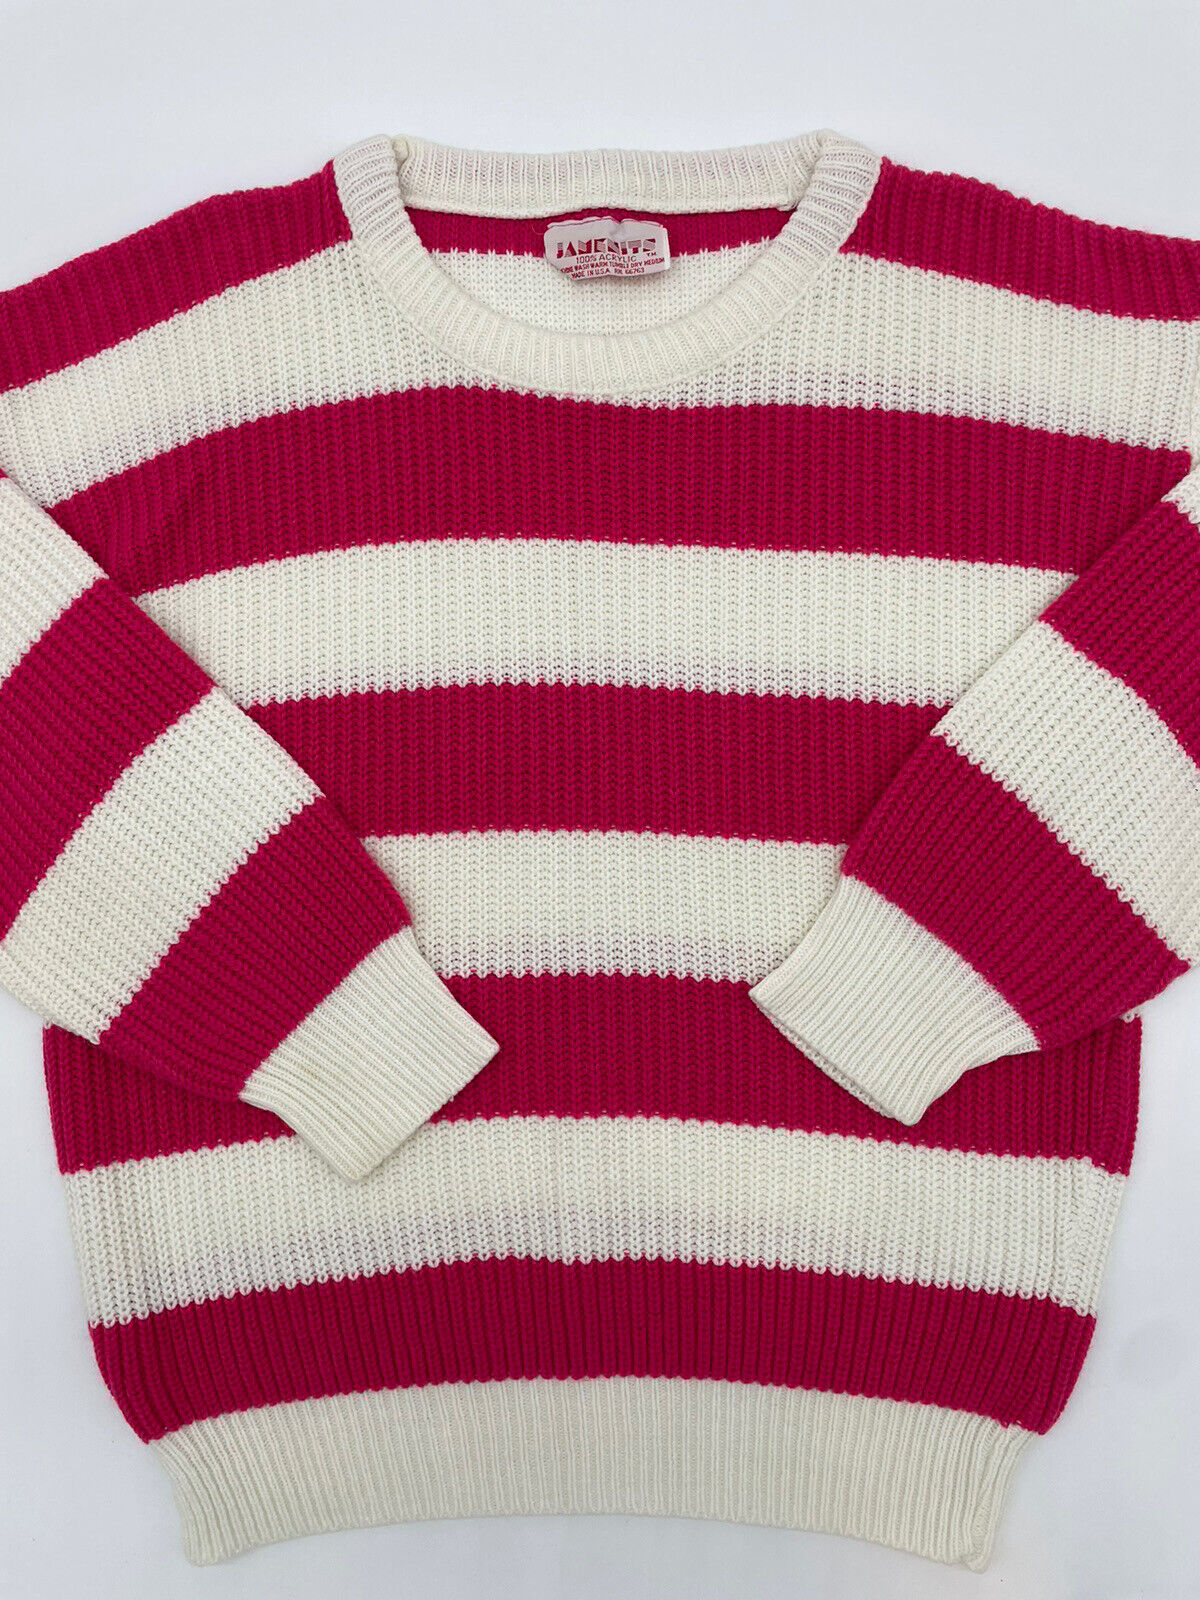 Jamenits vintage pink & white stripped knitted sw… - image 1